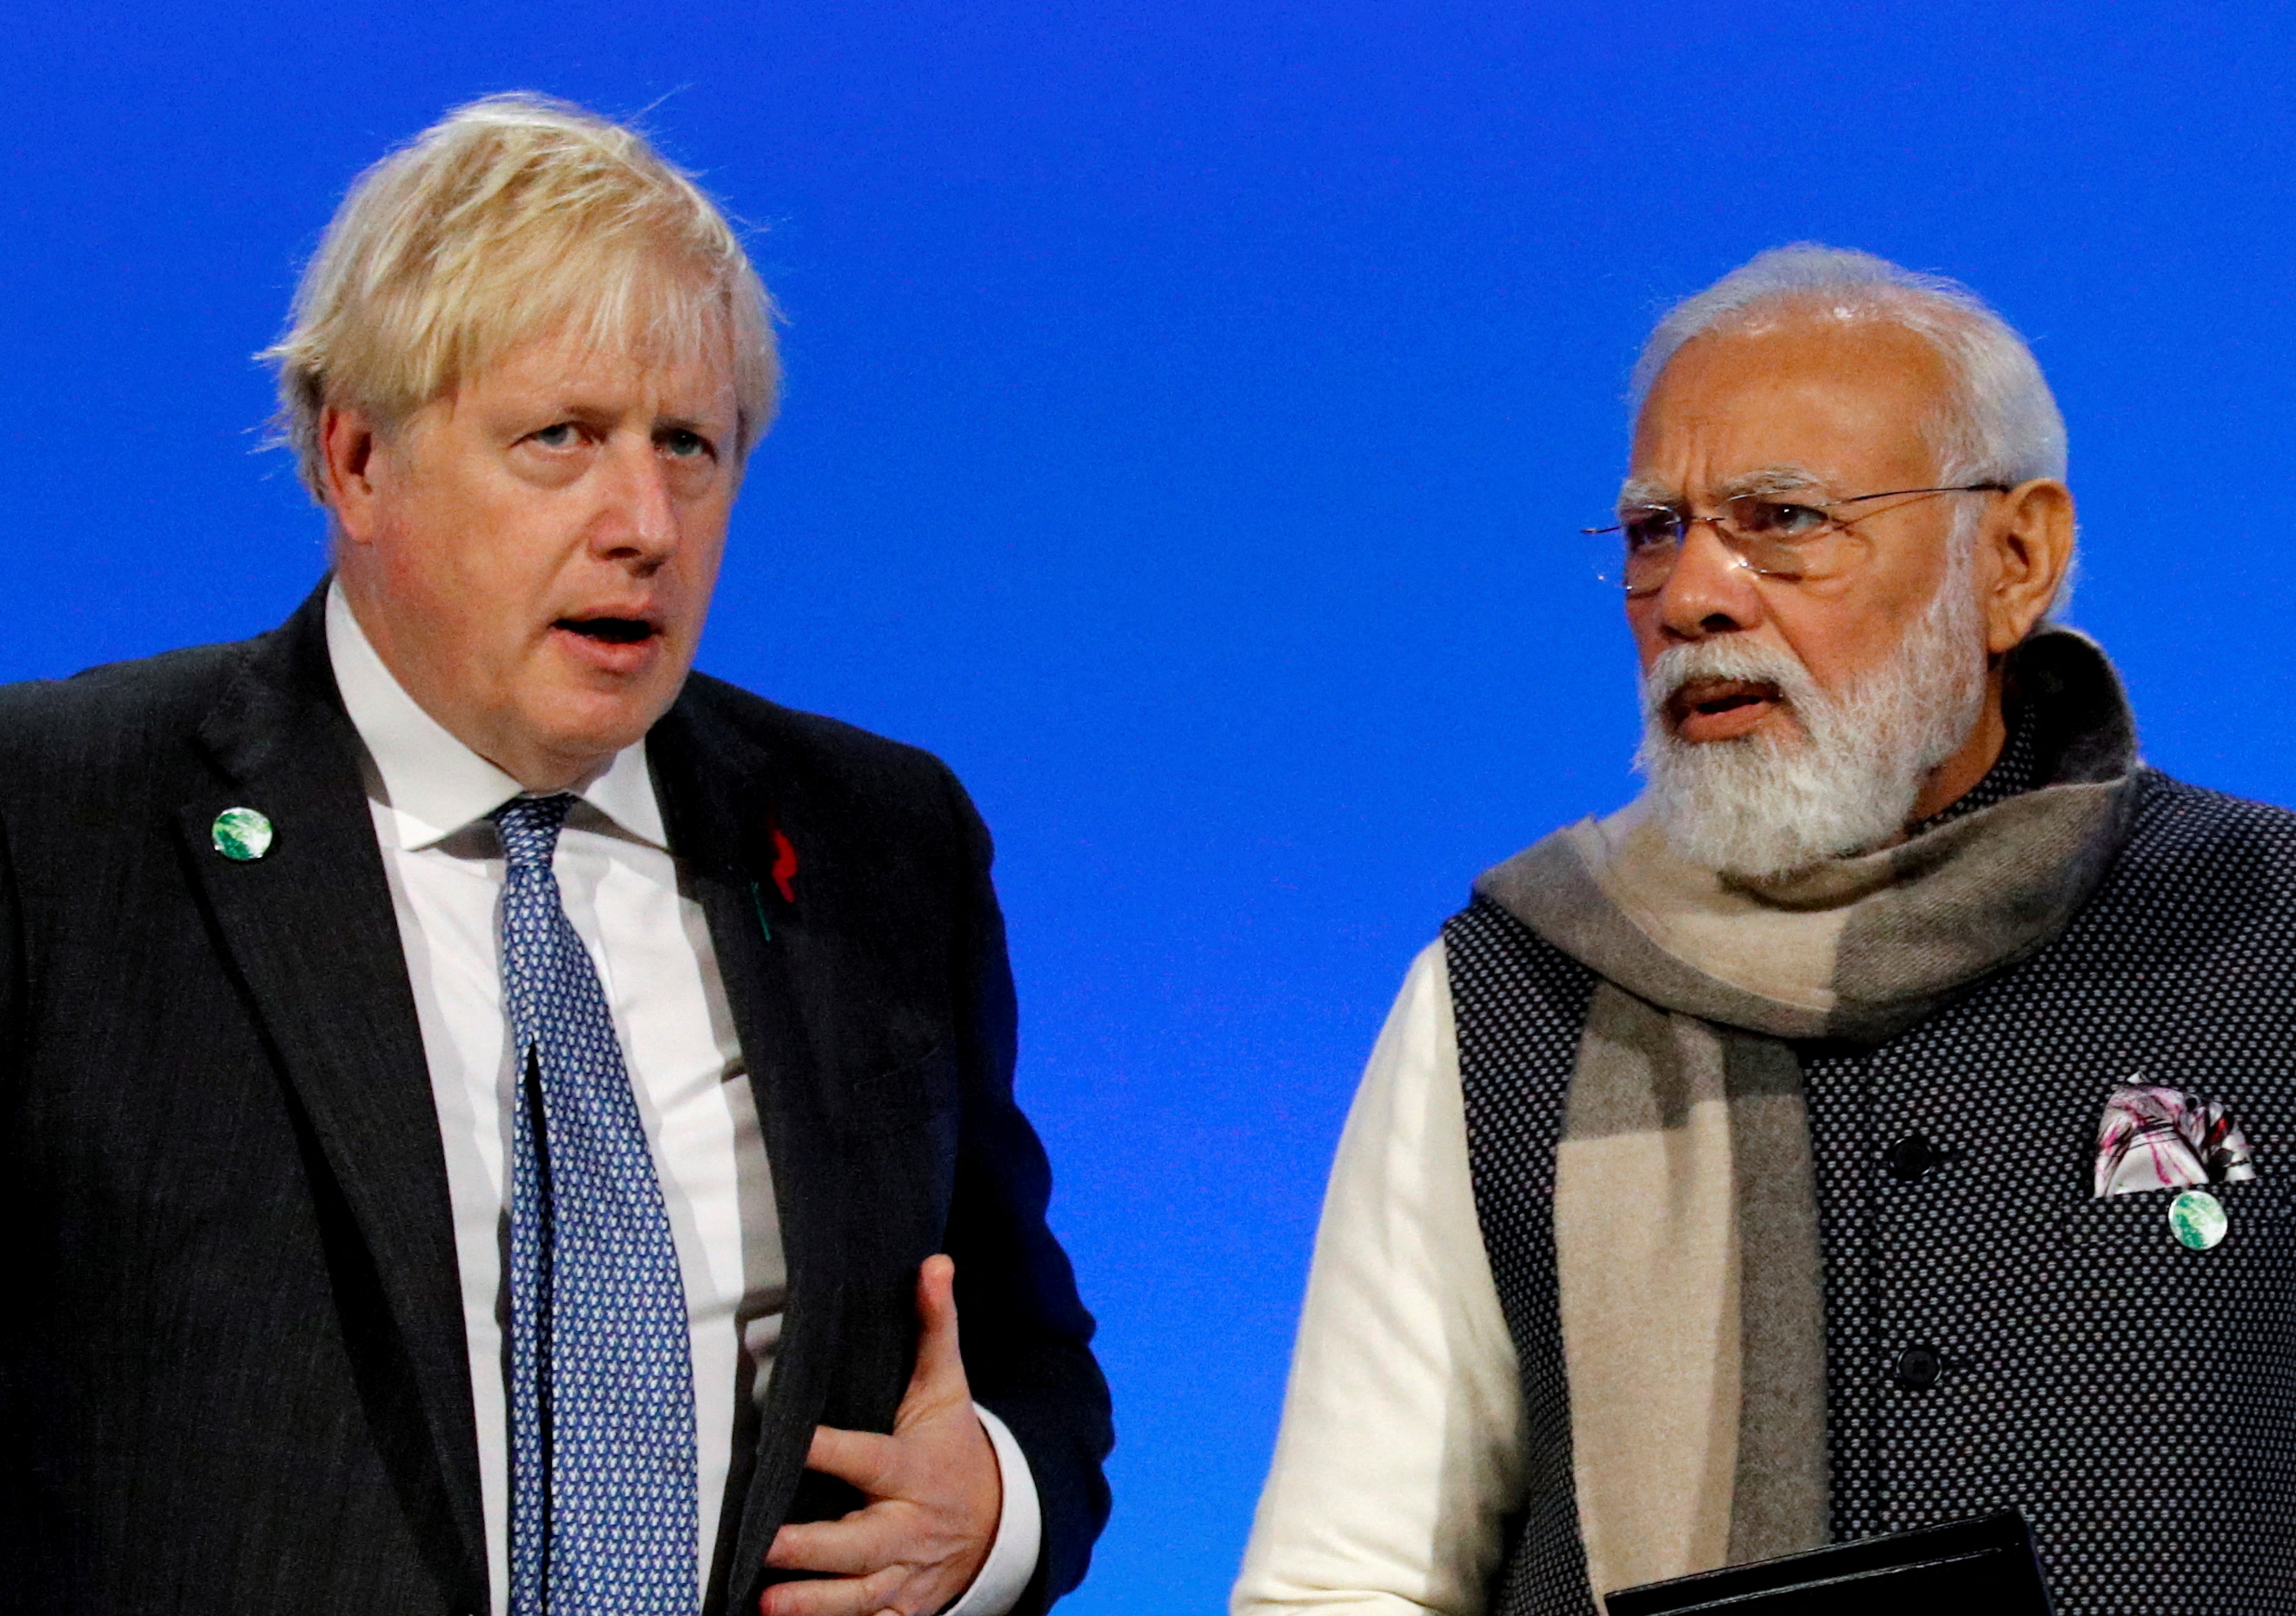 India's stand clear, fugitive offenders need to be brought to book: MEA ahead of Modi-Johnson talks